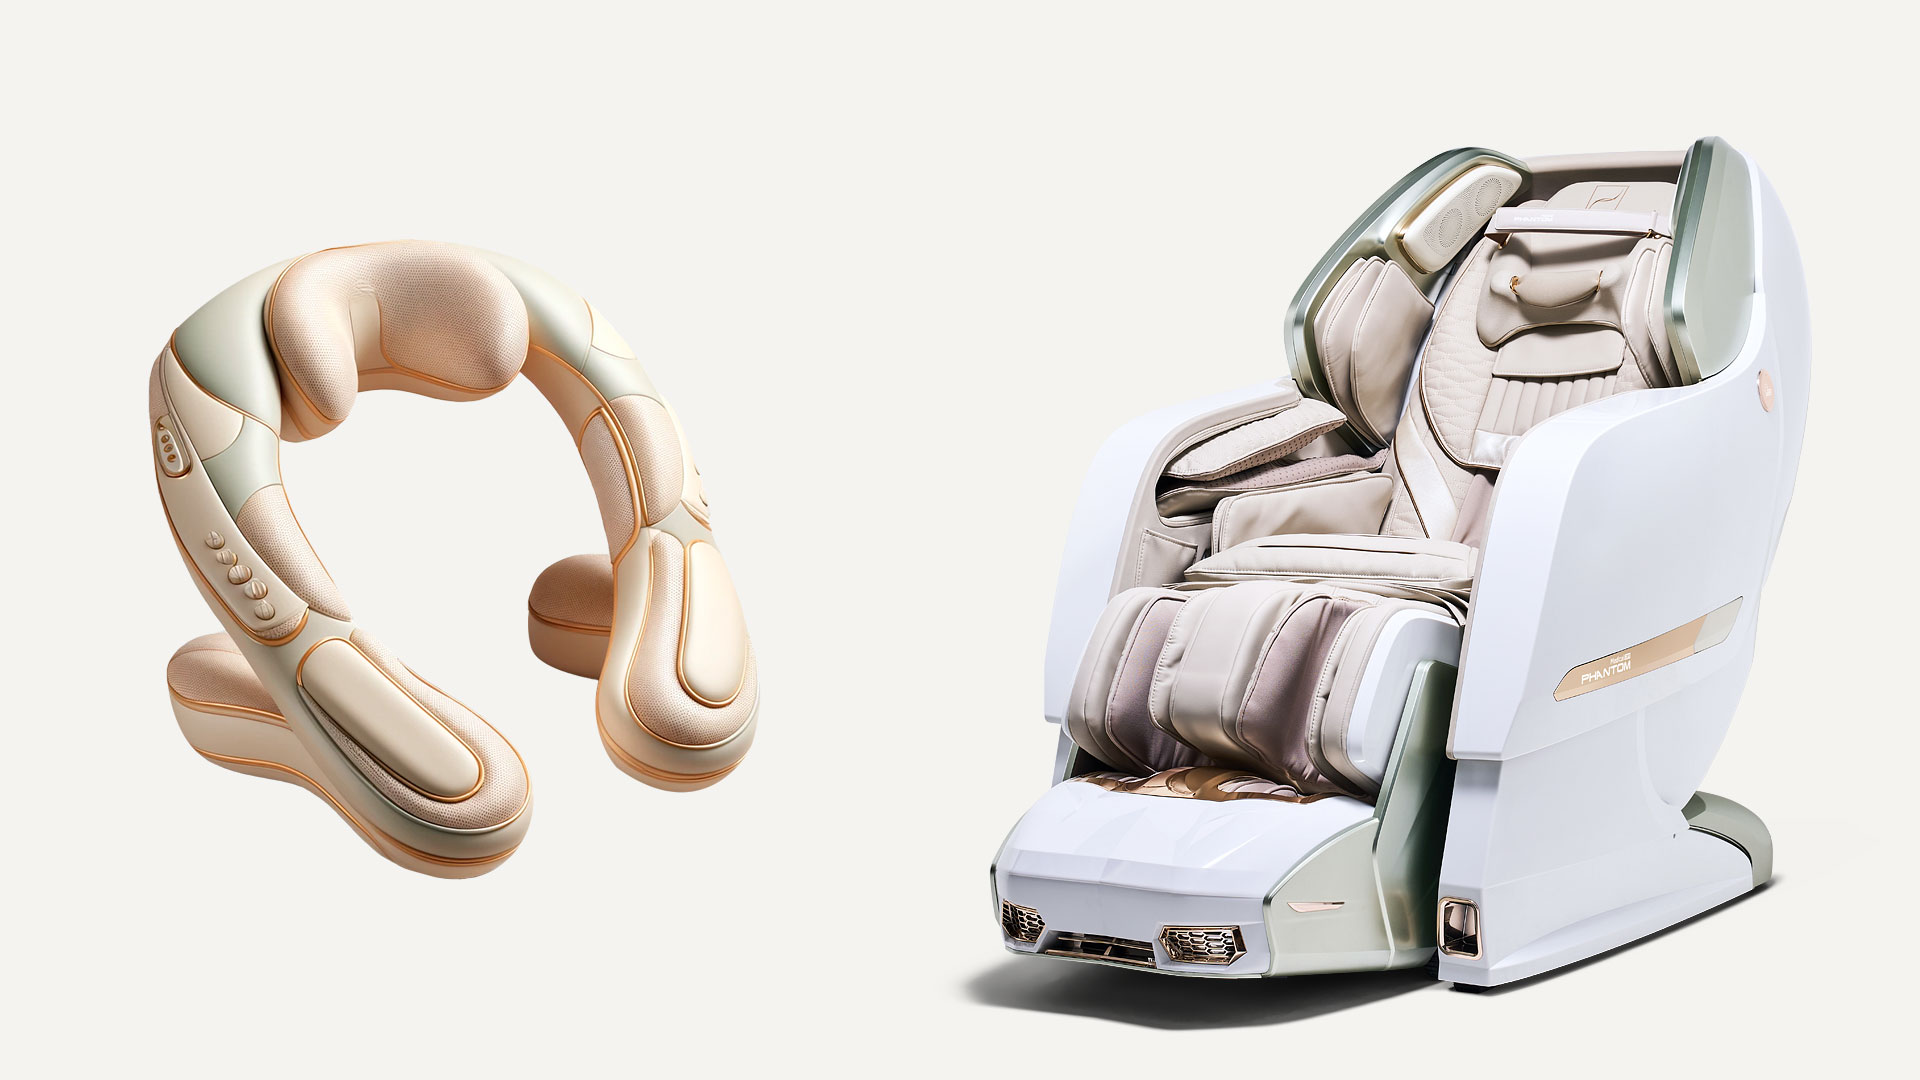 neck and shoulder pain – massager or massage chair?